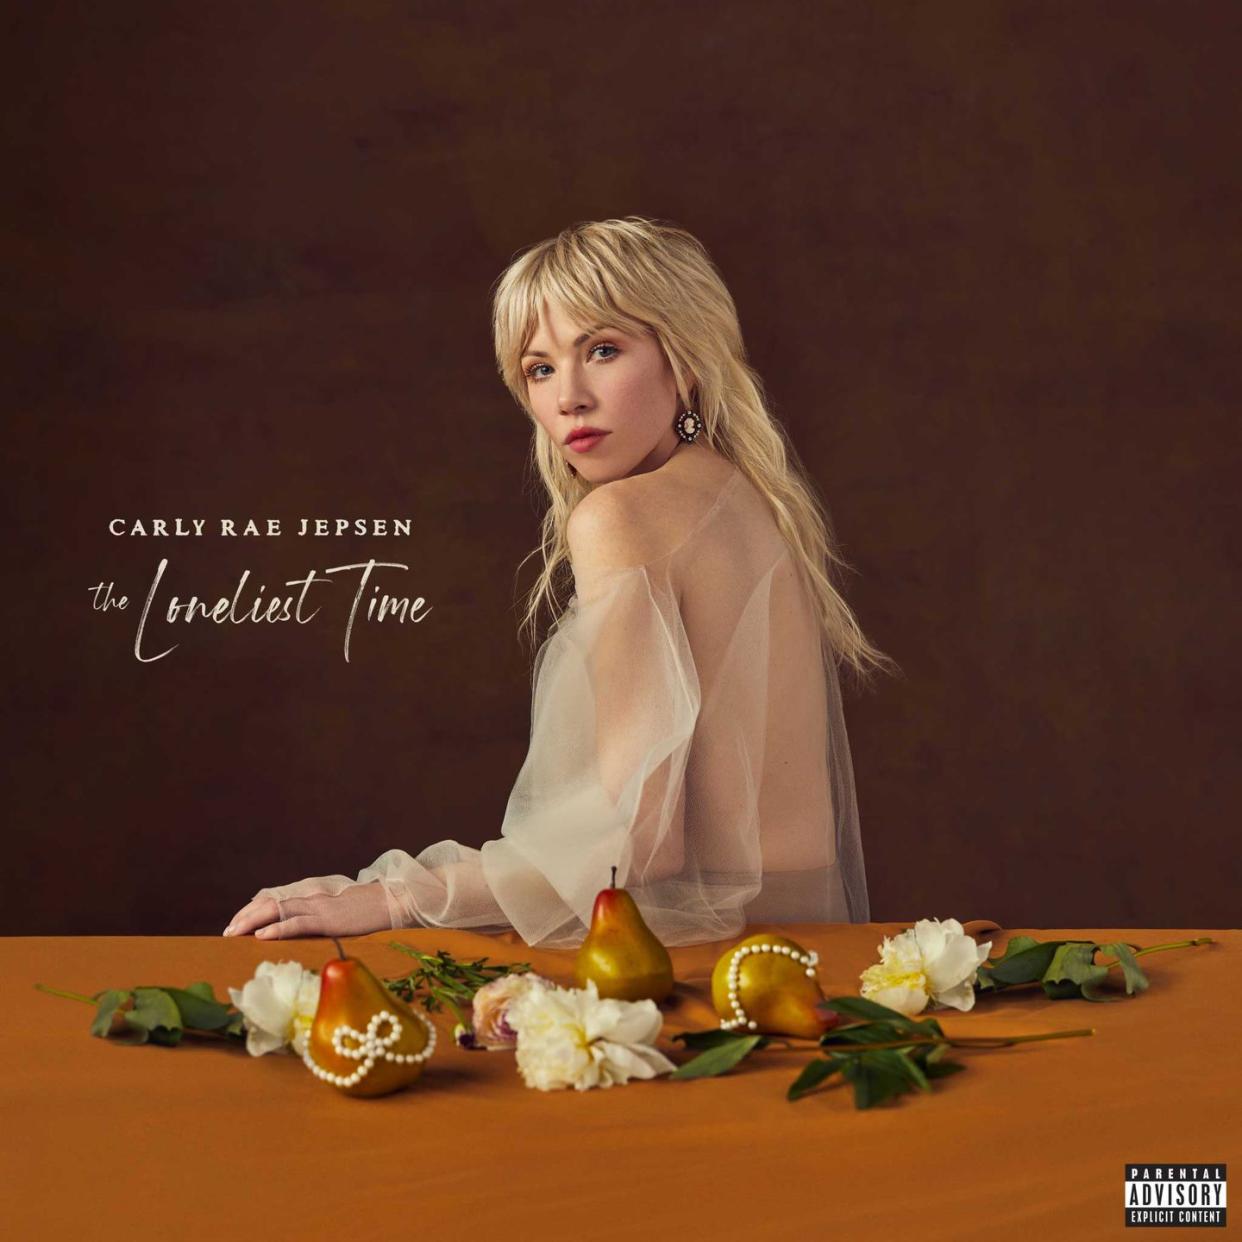 carly rae jepsen stands near a table with fake fruit and flowers